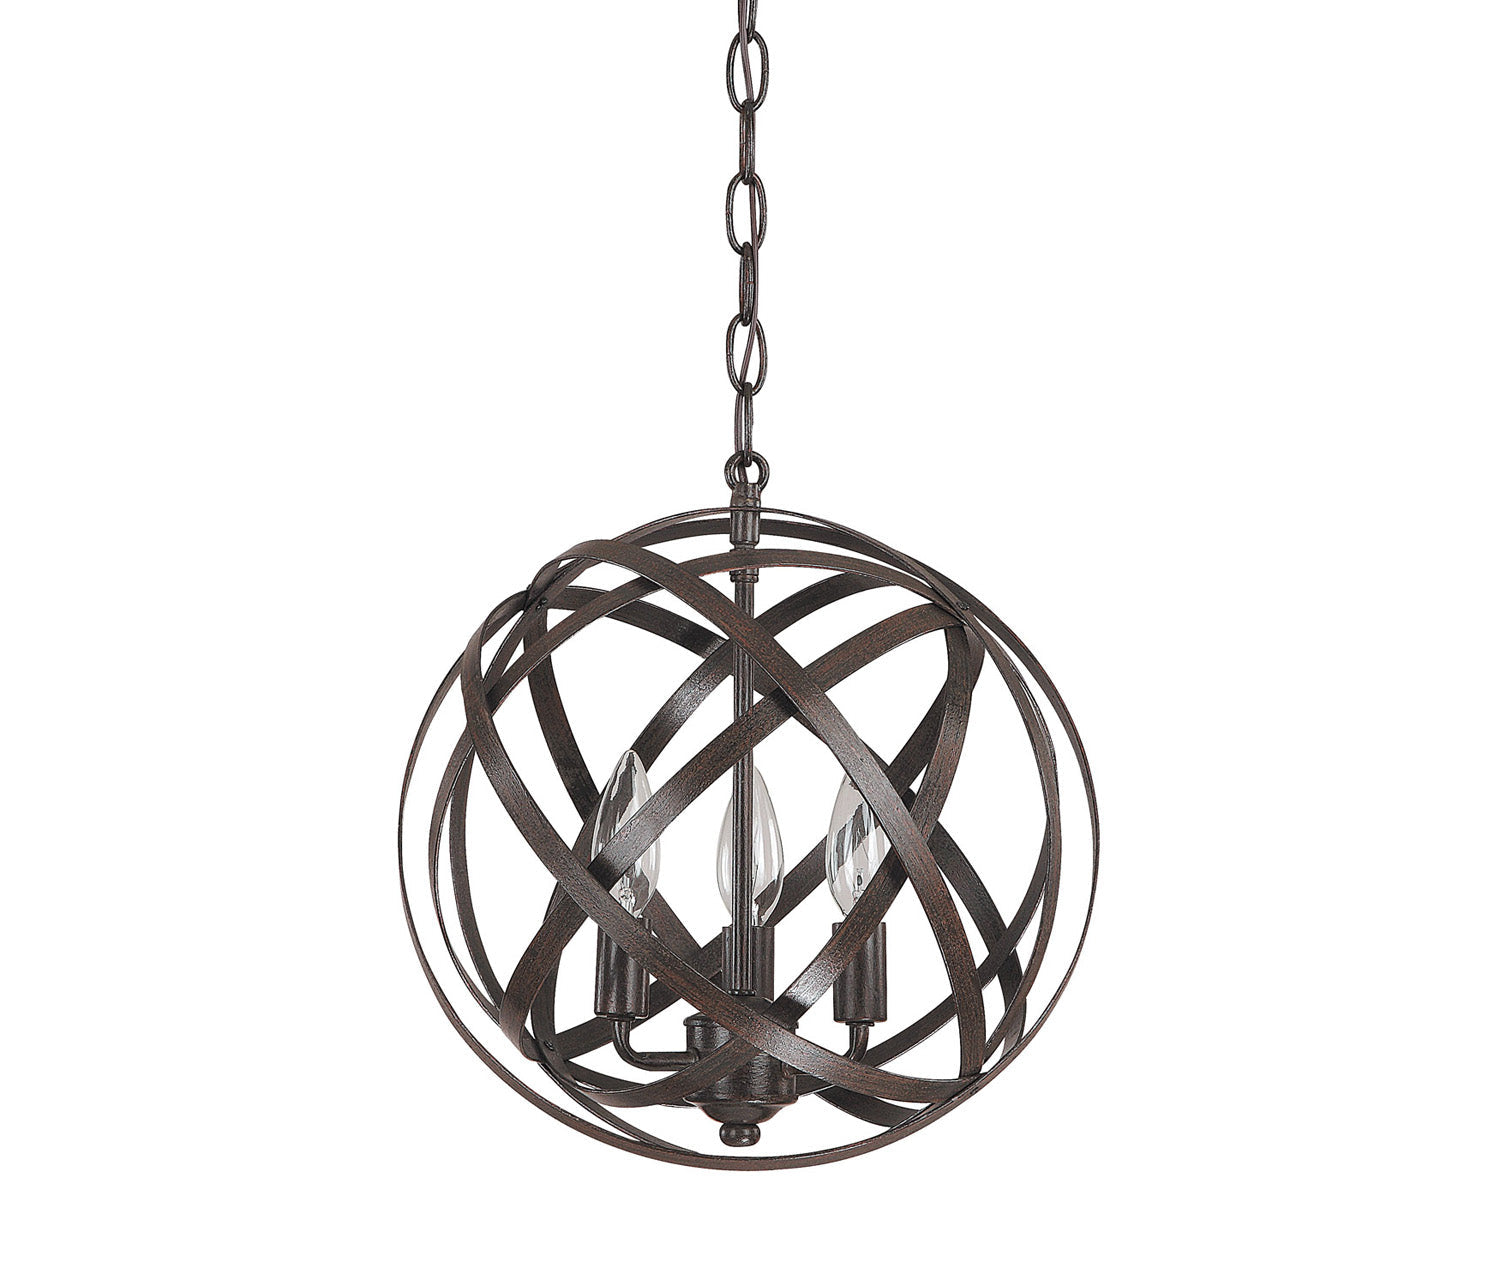 Capital Axis 4233RS Chandelier Light - Russet